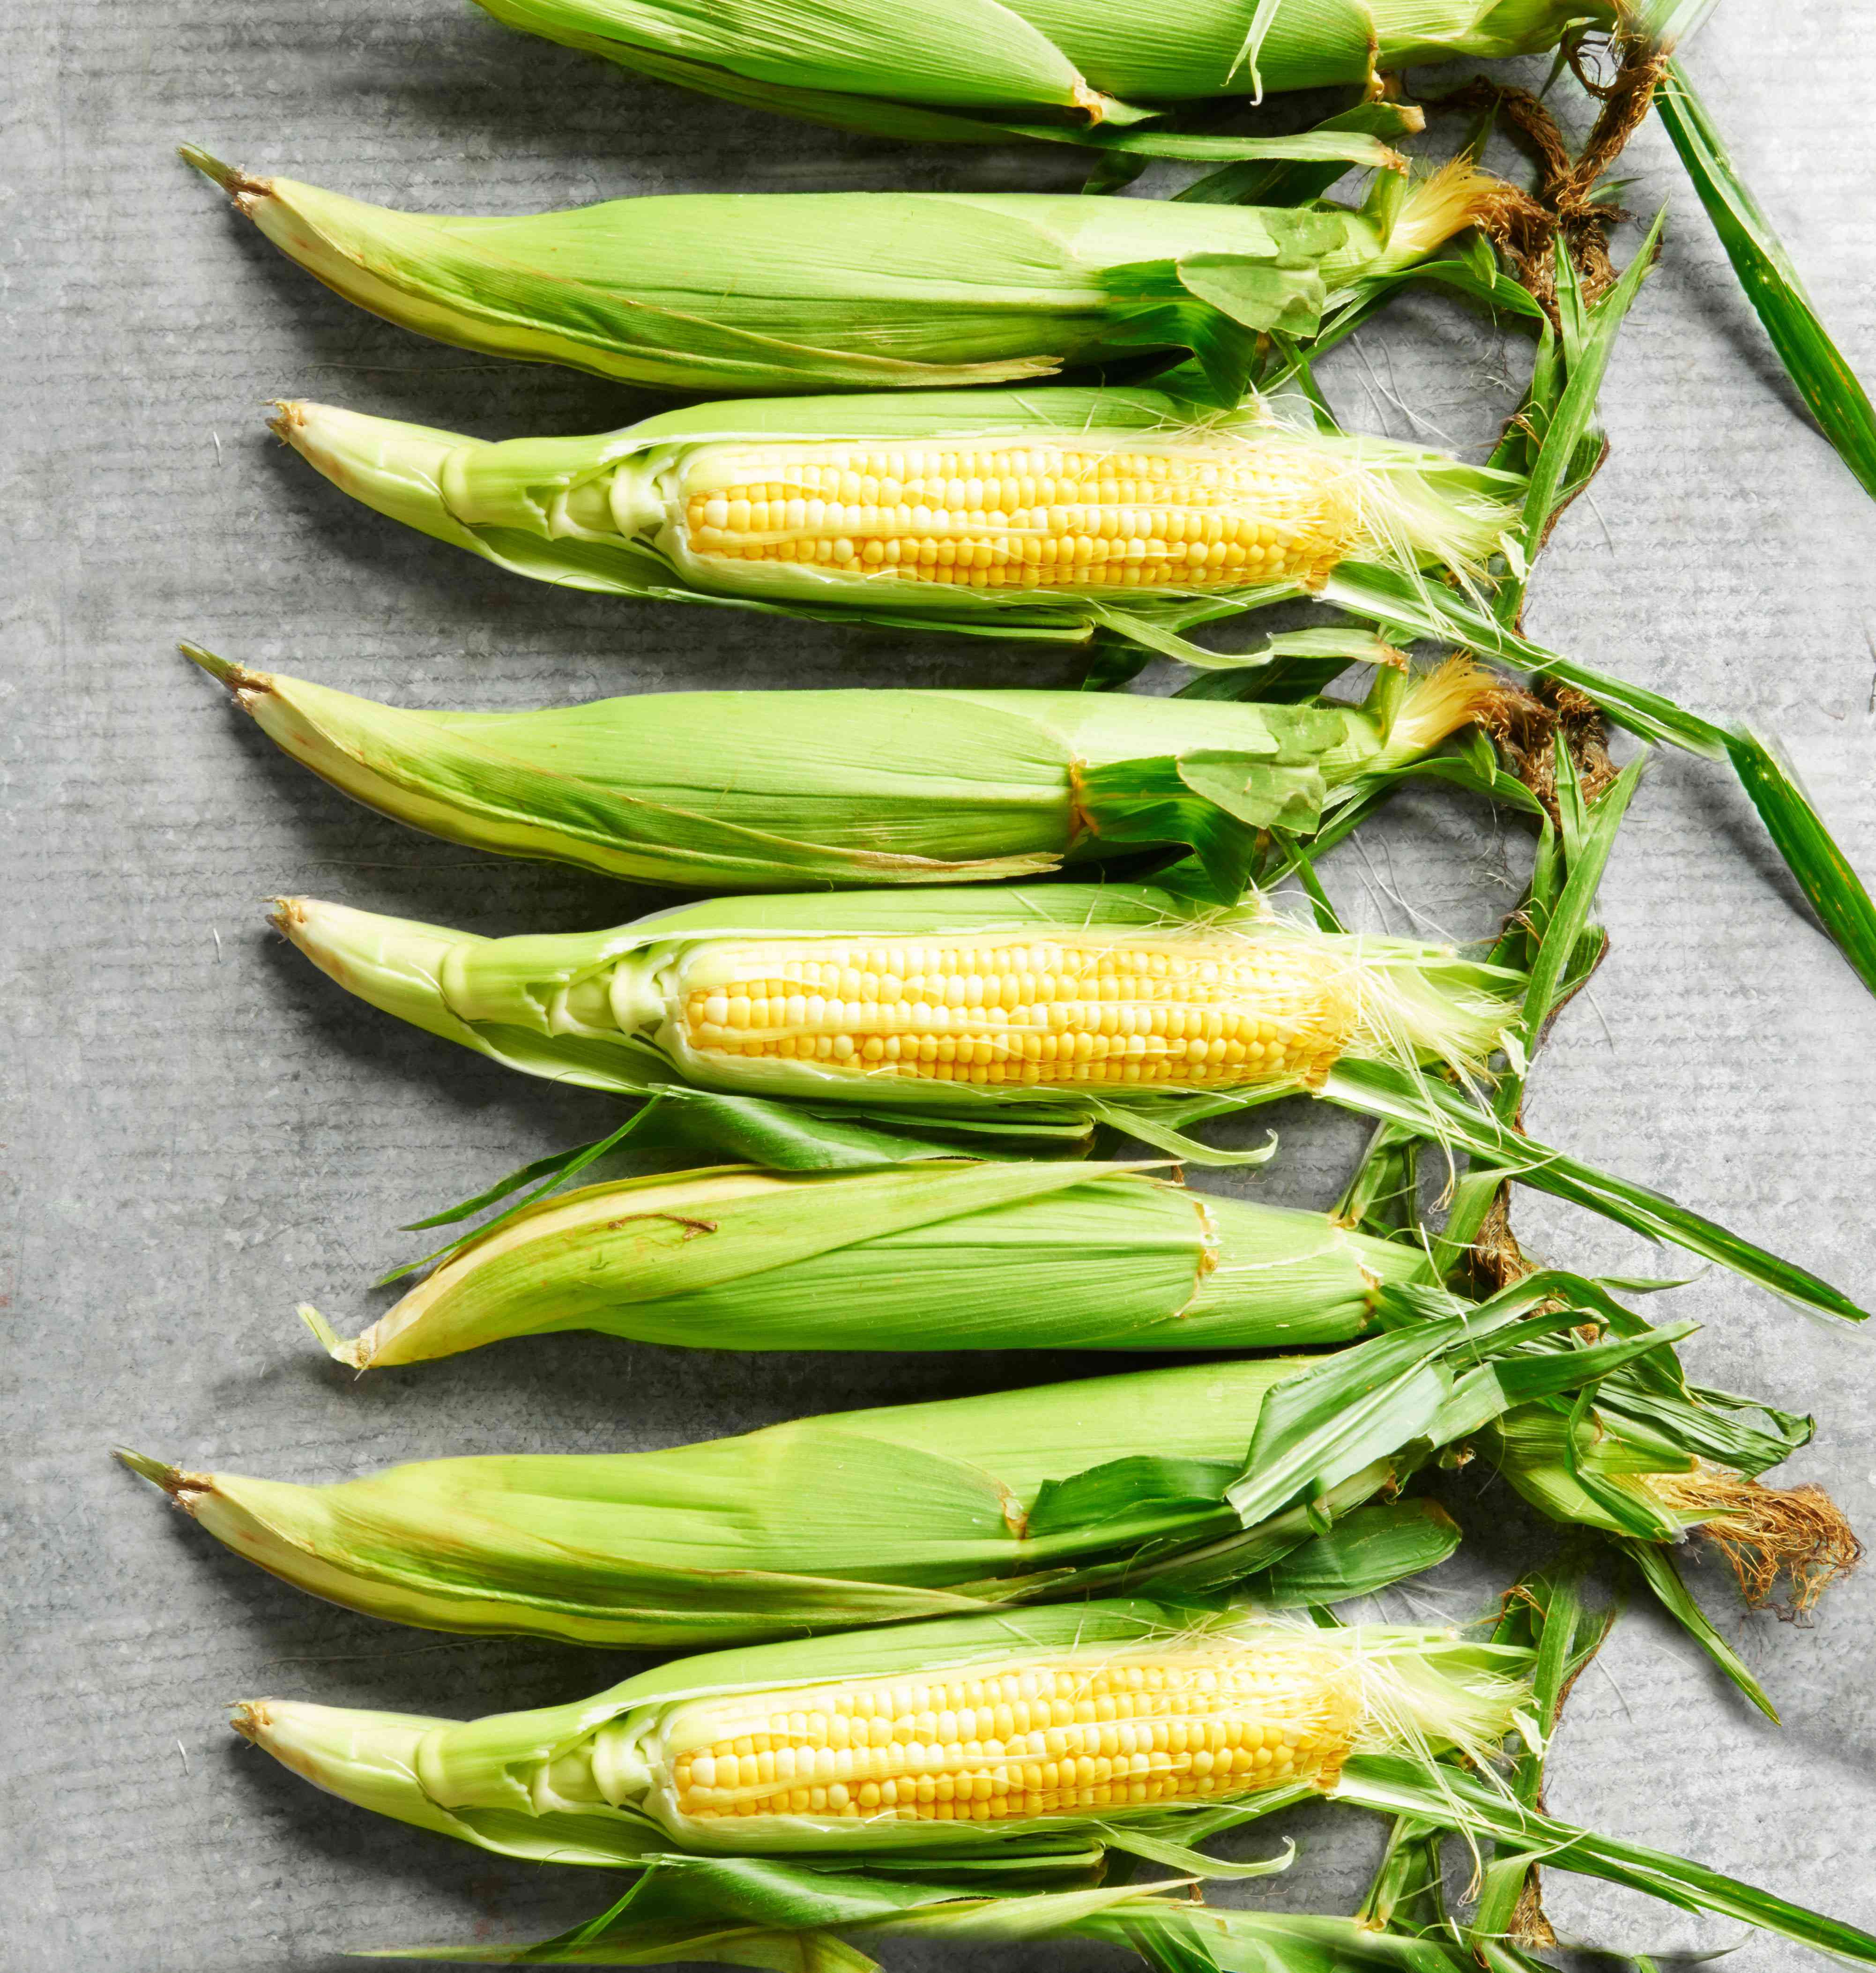 How to Store Corn on the Cob, According to Our Test Kitchen